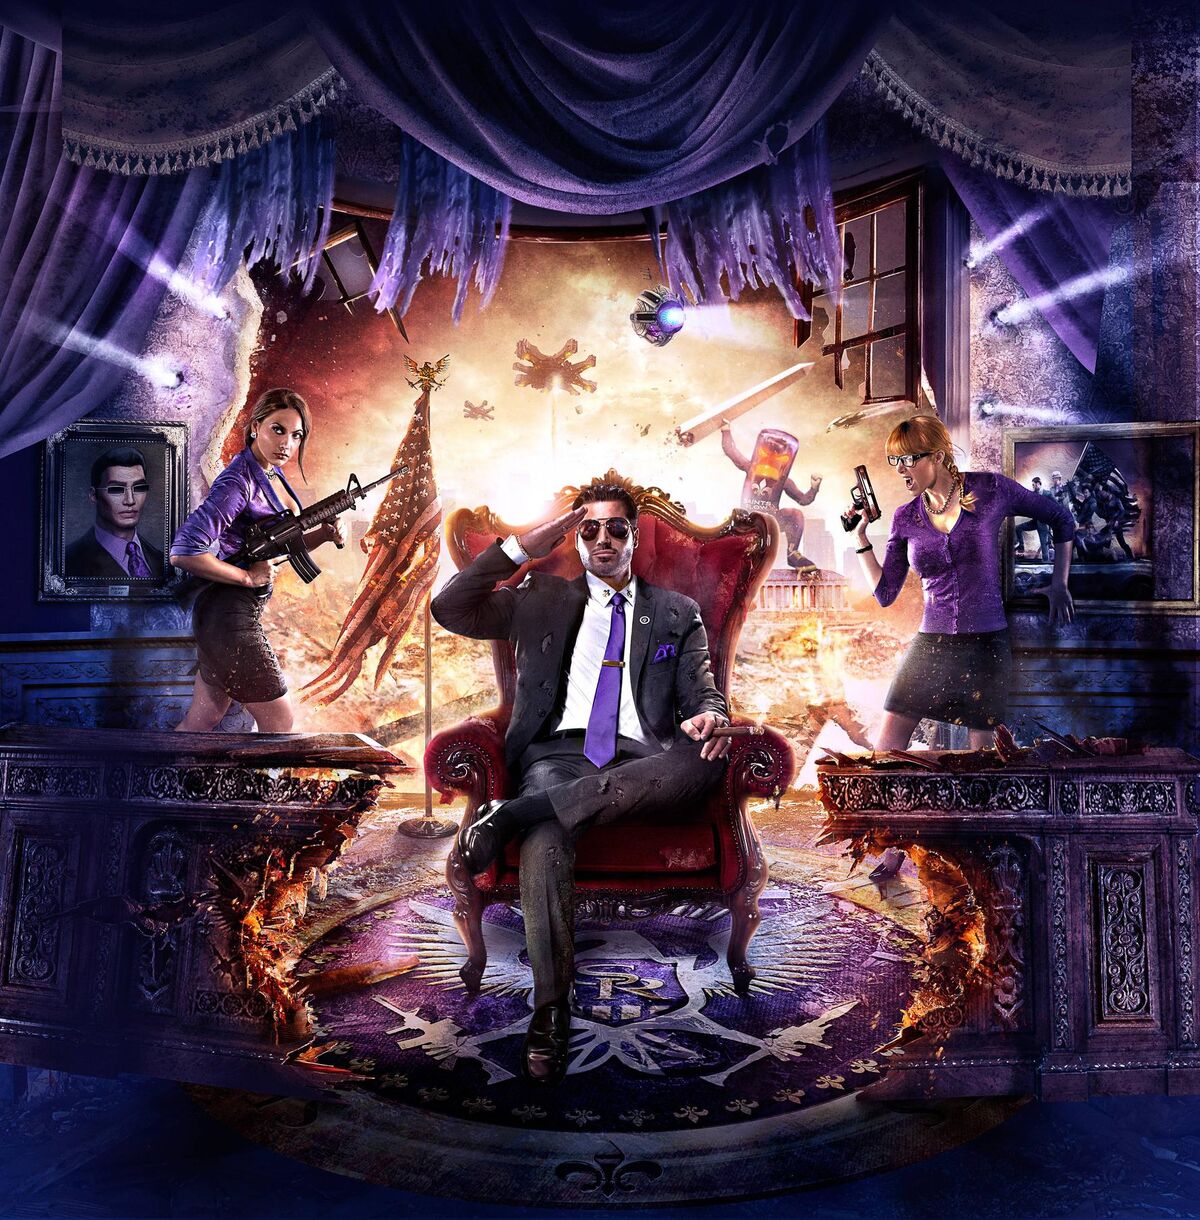 Saints Row The Third Remastered (2020) Review: Back in the Steelport Groove  – 3rd Voice Gaming